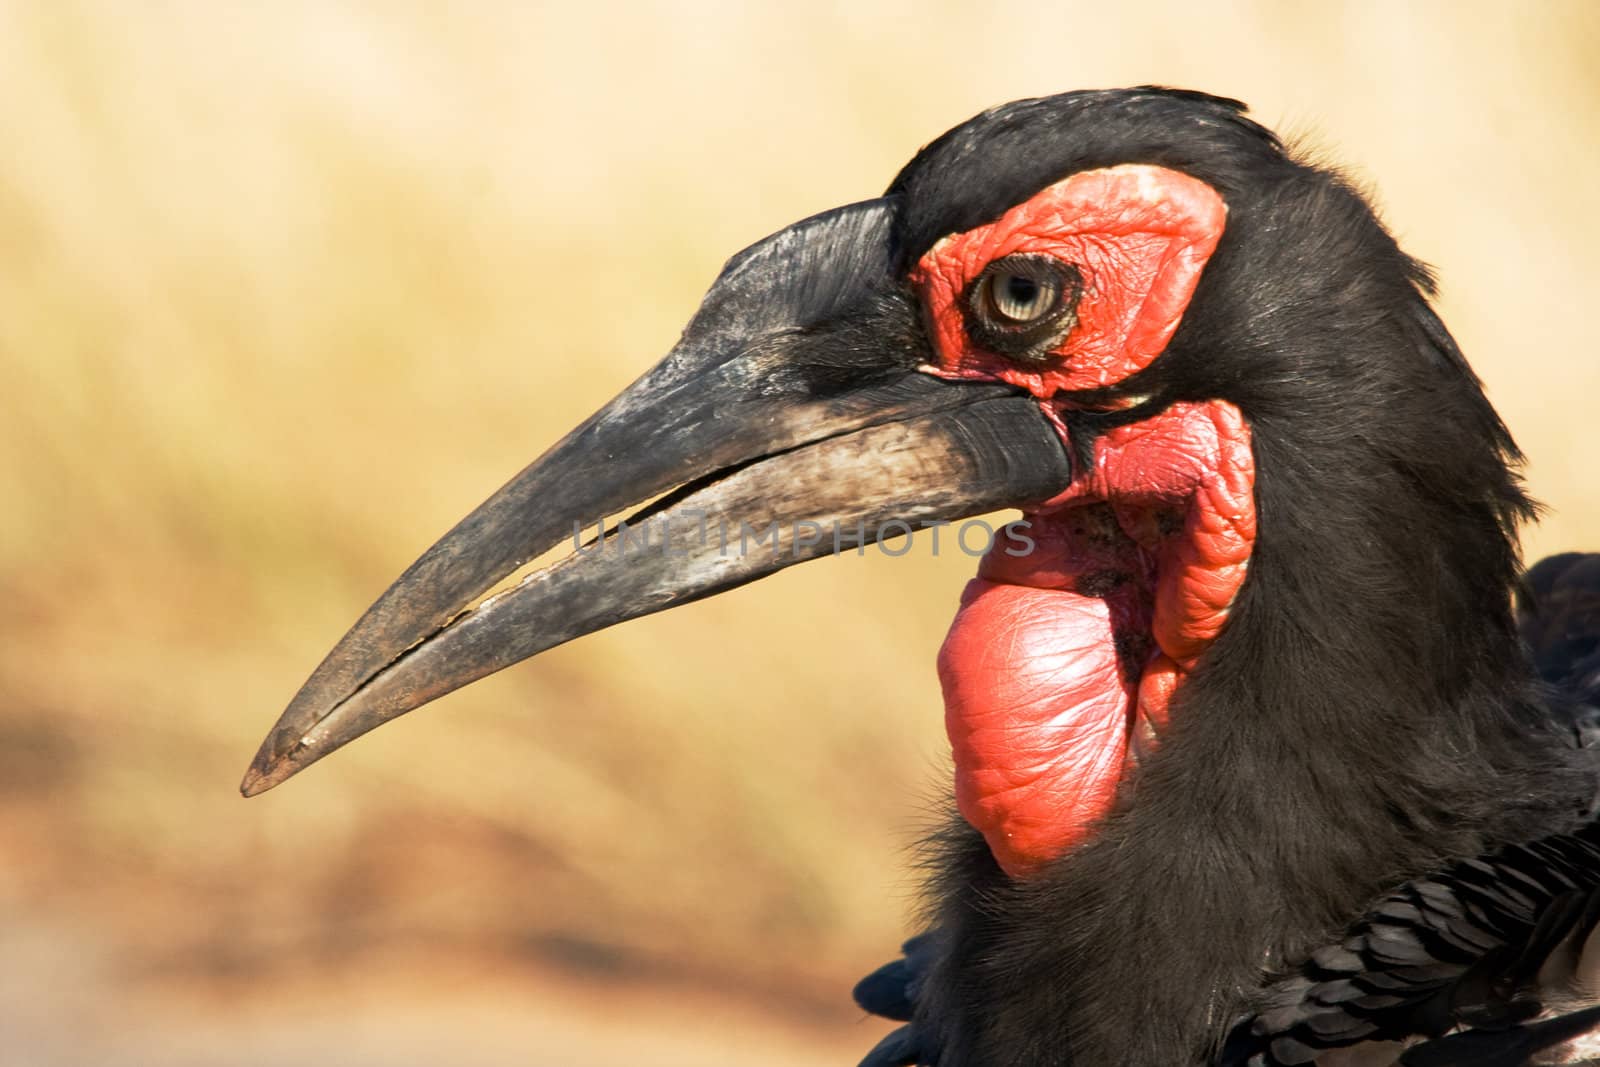 Southern Ground Hornbill (Bucorvus leadbeateri) photographed in Kruger National Park South Africa.